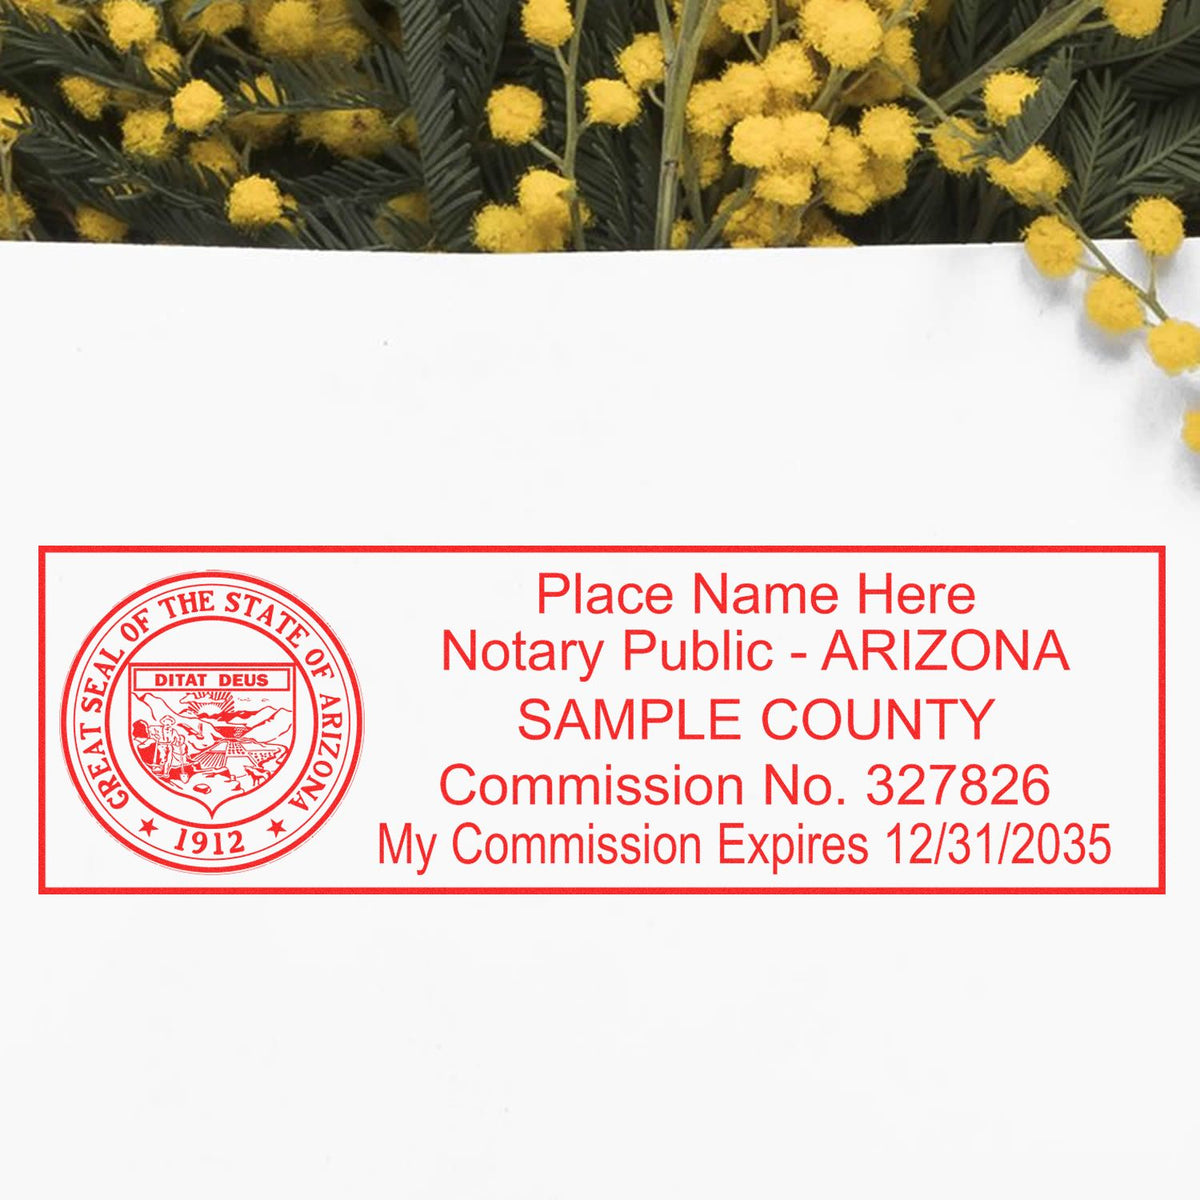 An alternative view of the Slim Pre-Inked State Seal Notary Stamp for Arizona stamped on a sheet of paper showing the image in use